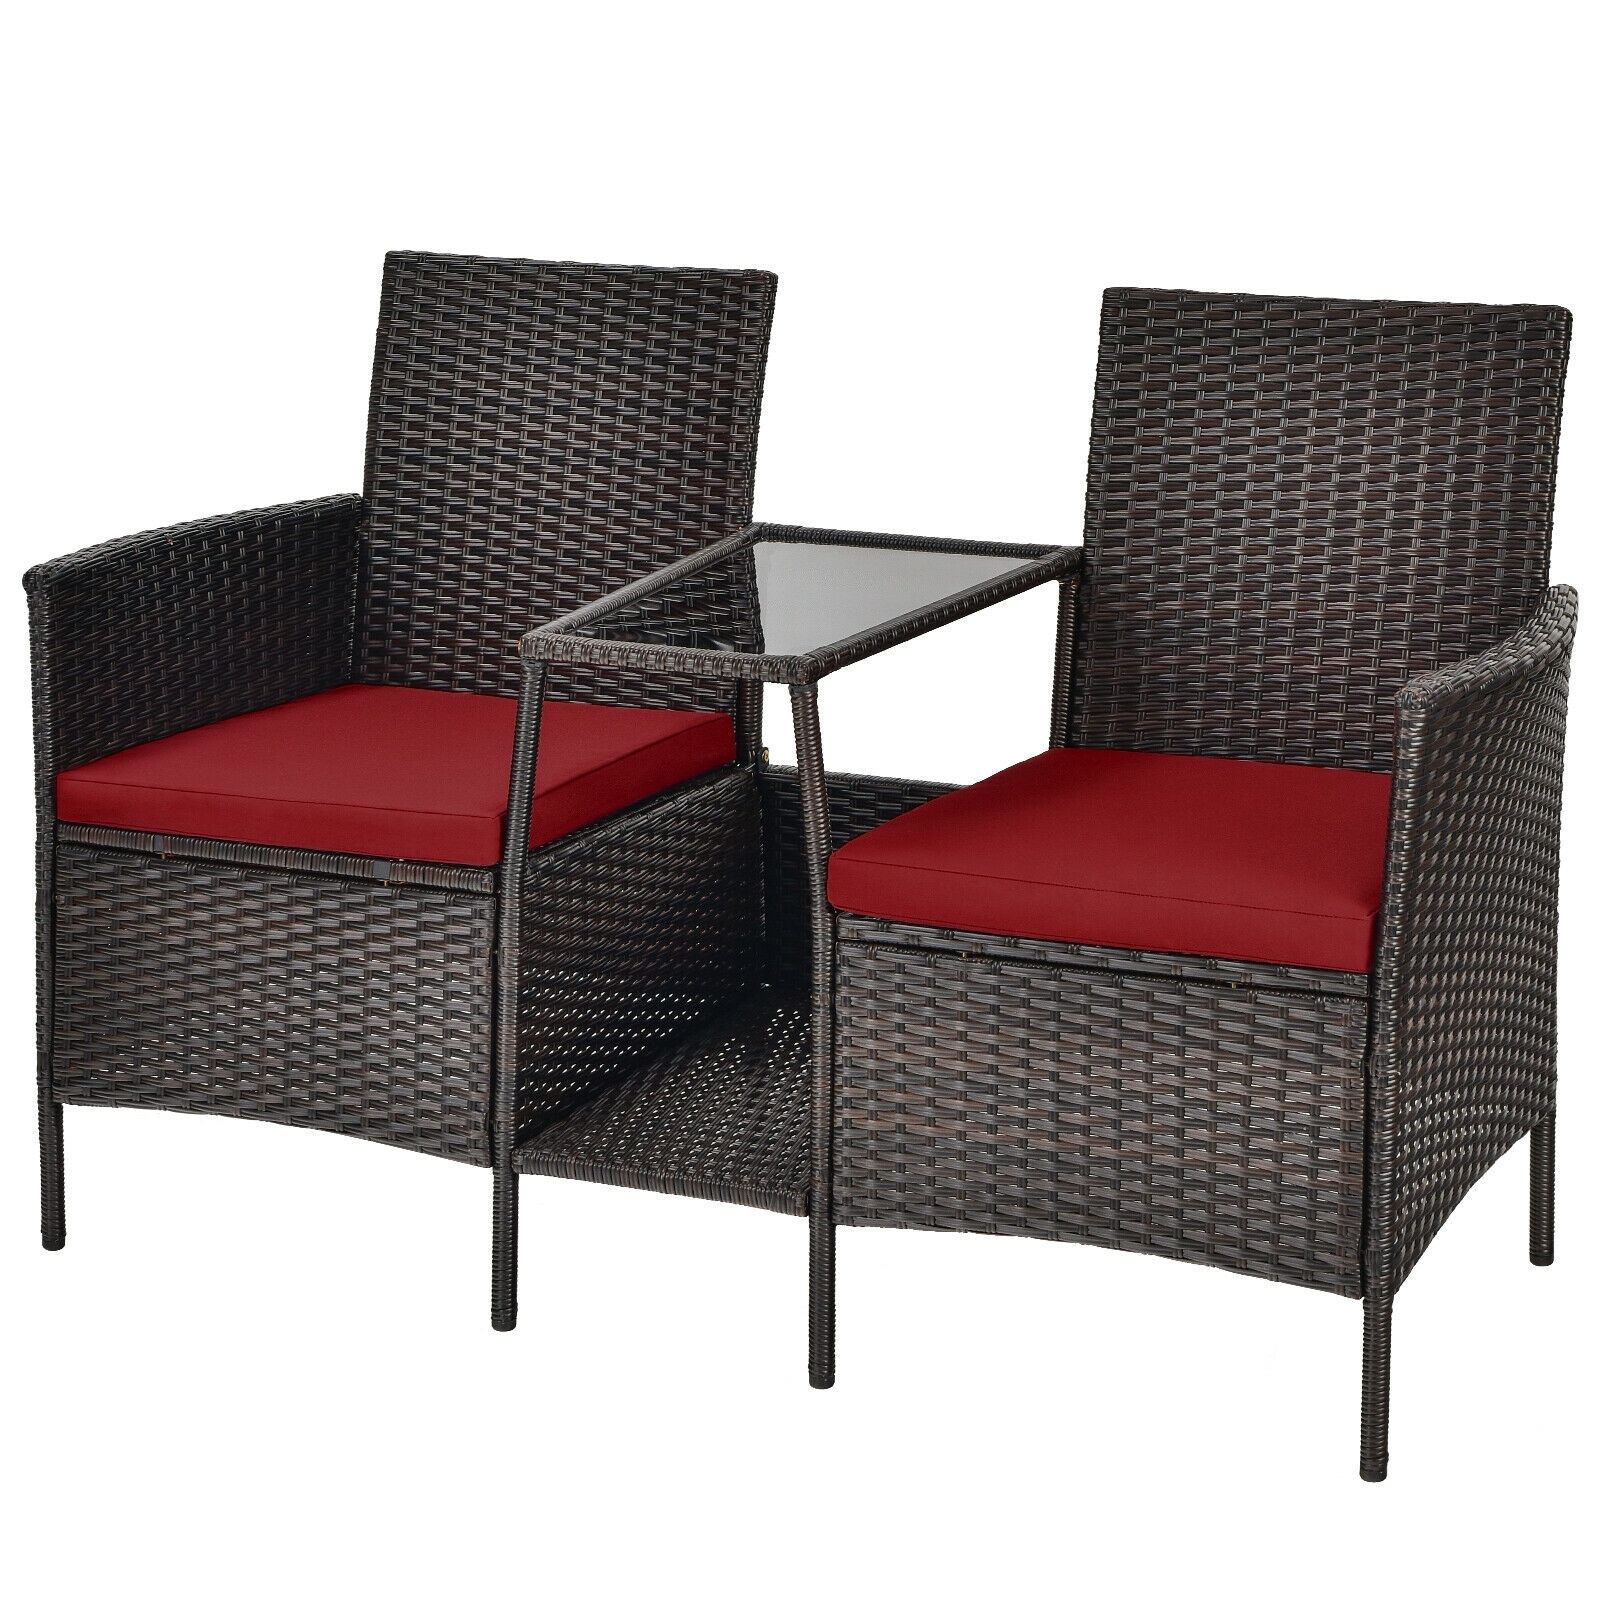 Forclover Patio Rattan Wicker Conversation Set Sofa Cushioned Loveseat  Glass Table Red In The Patio Chairs Department At Lowes Within Cushioned Chair Loveseat Tables (View 8 of 15)